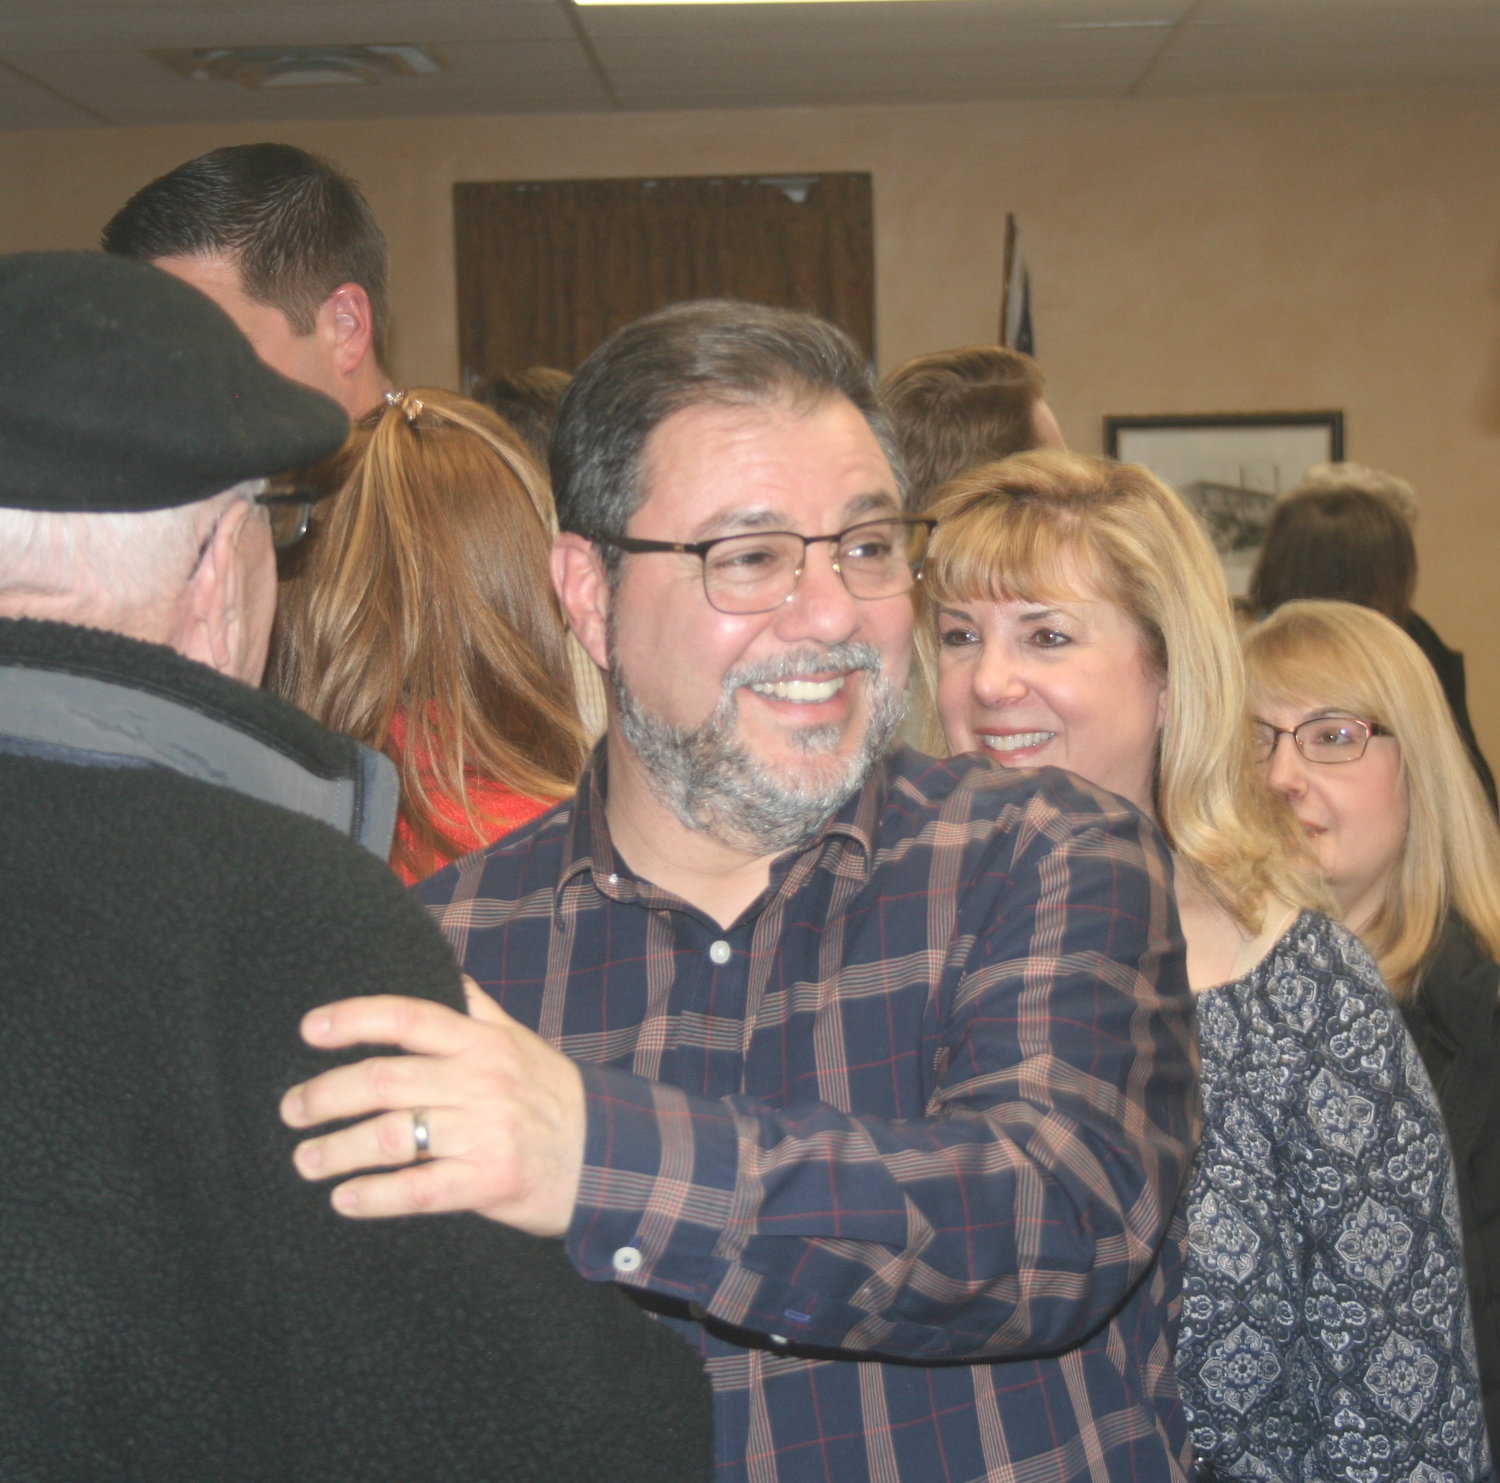 Deputy Mayor Perry Cuocci is congratulated for running a strong campaign despite his loss.